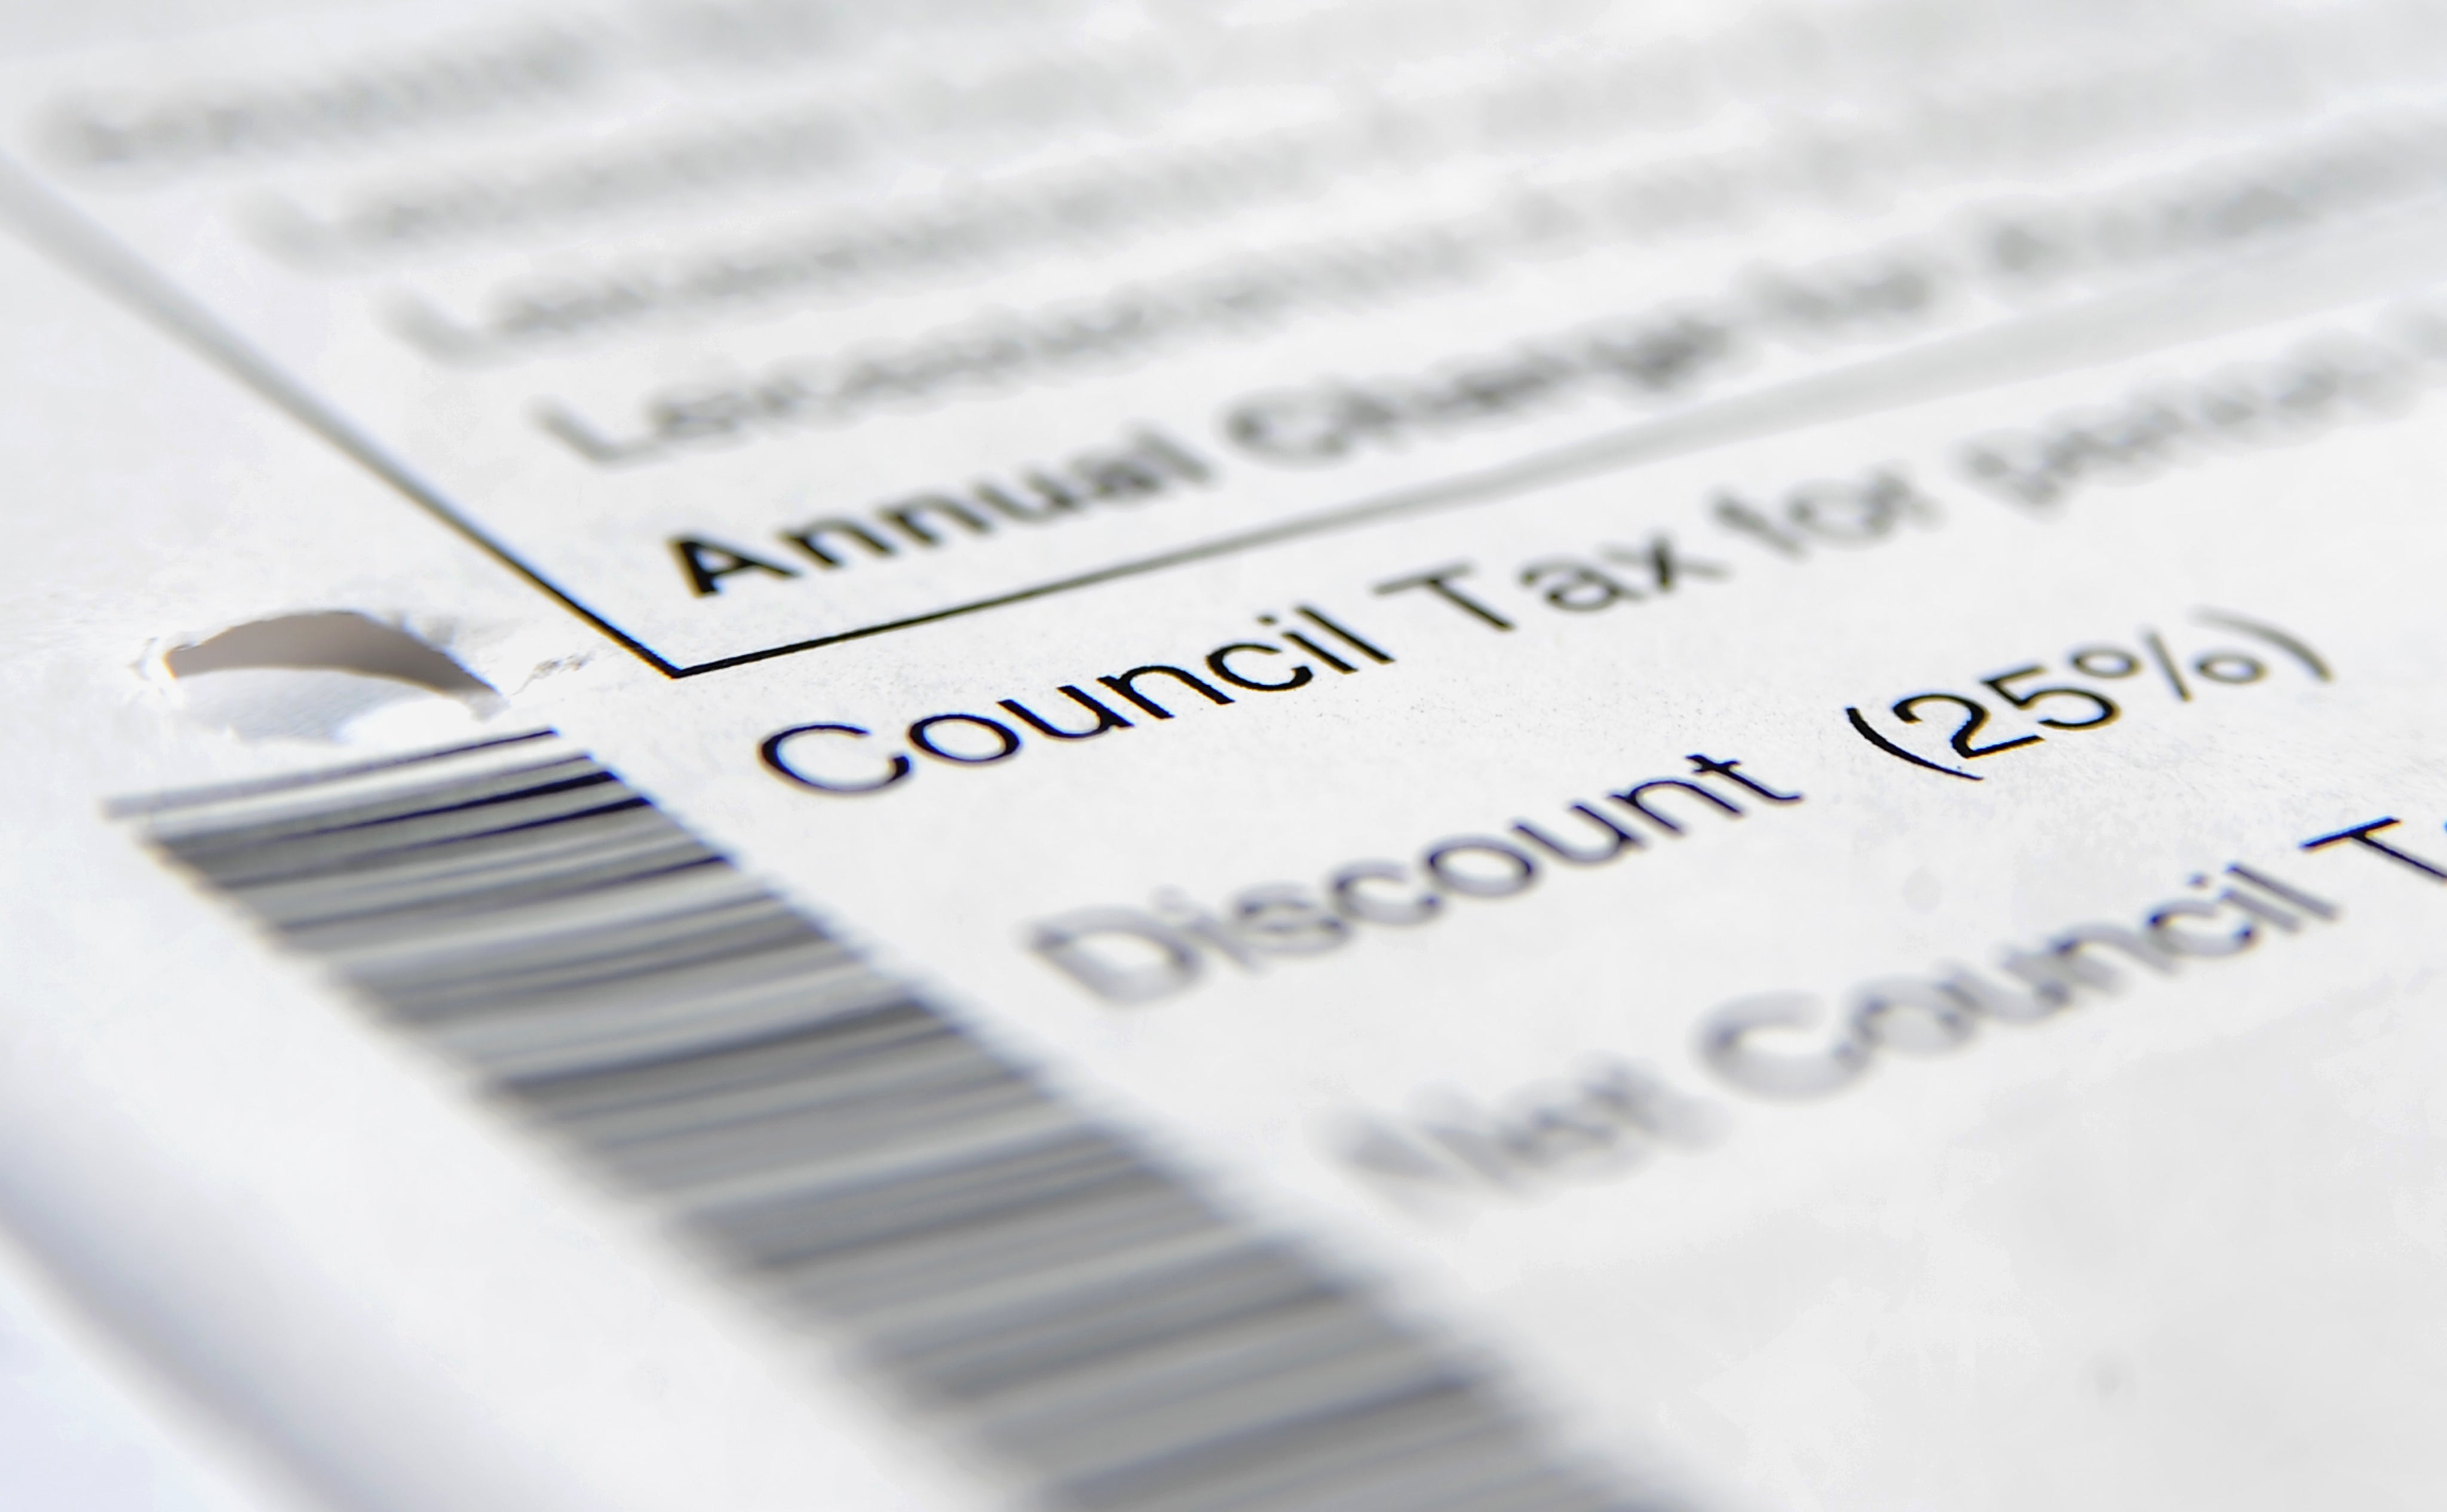 The average Band D council tax set by local authorities in England for 2022/23 is £1,966